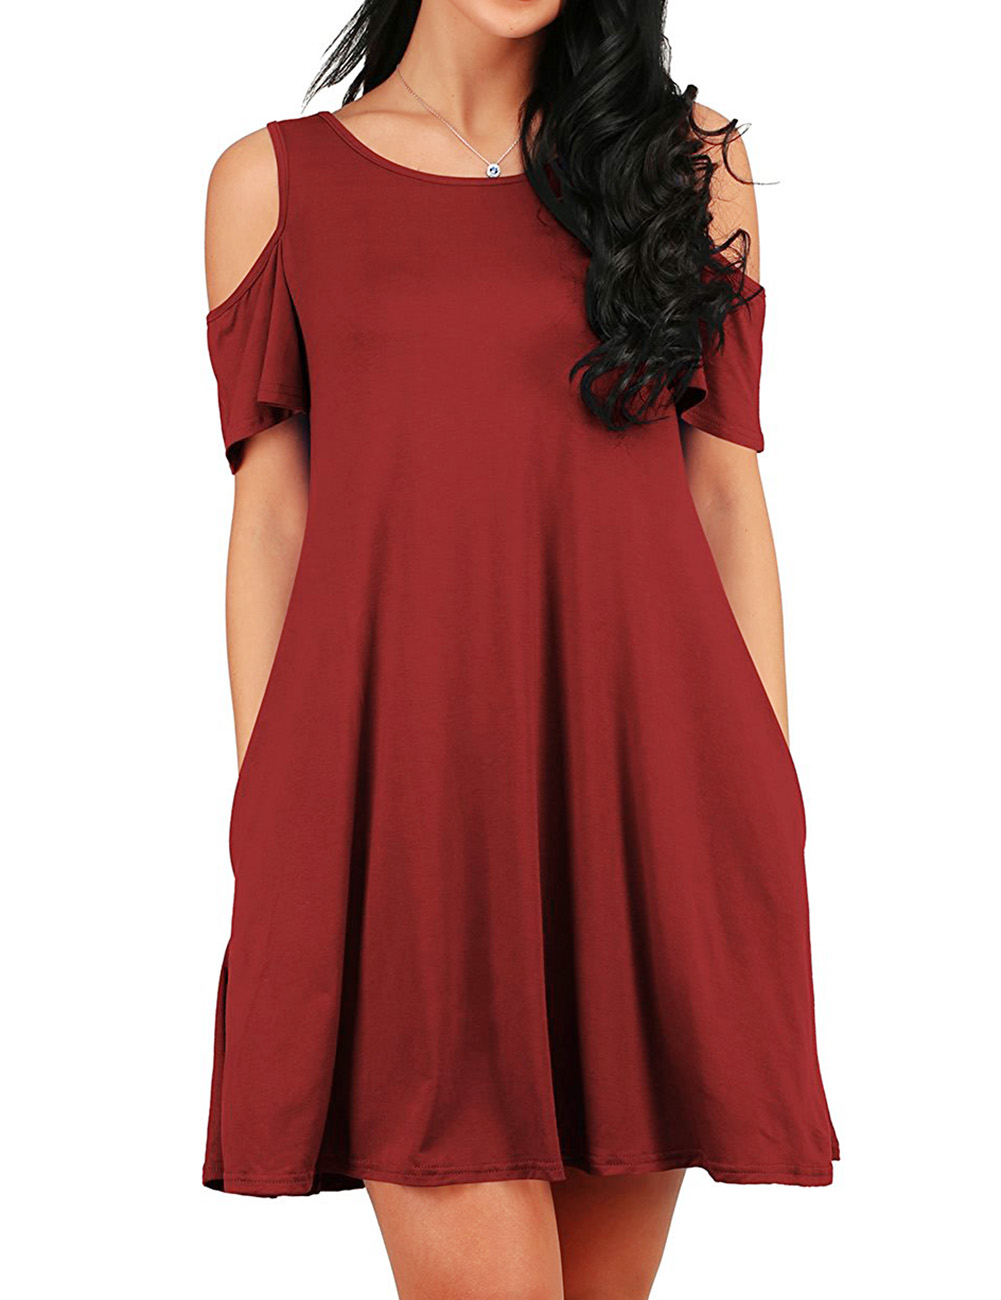 [US Direct] AMZPLUS Women’s Casual Cut Out Cold Shoulder Tunic Dress with Hand Pockets Burgundy_XL